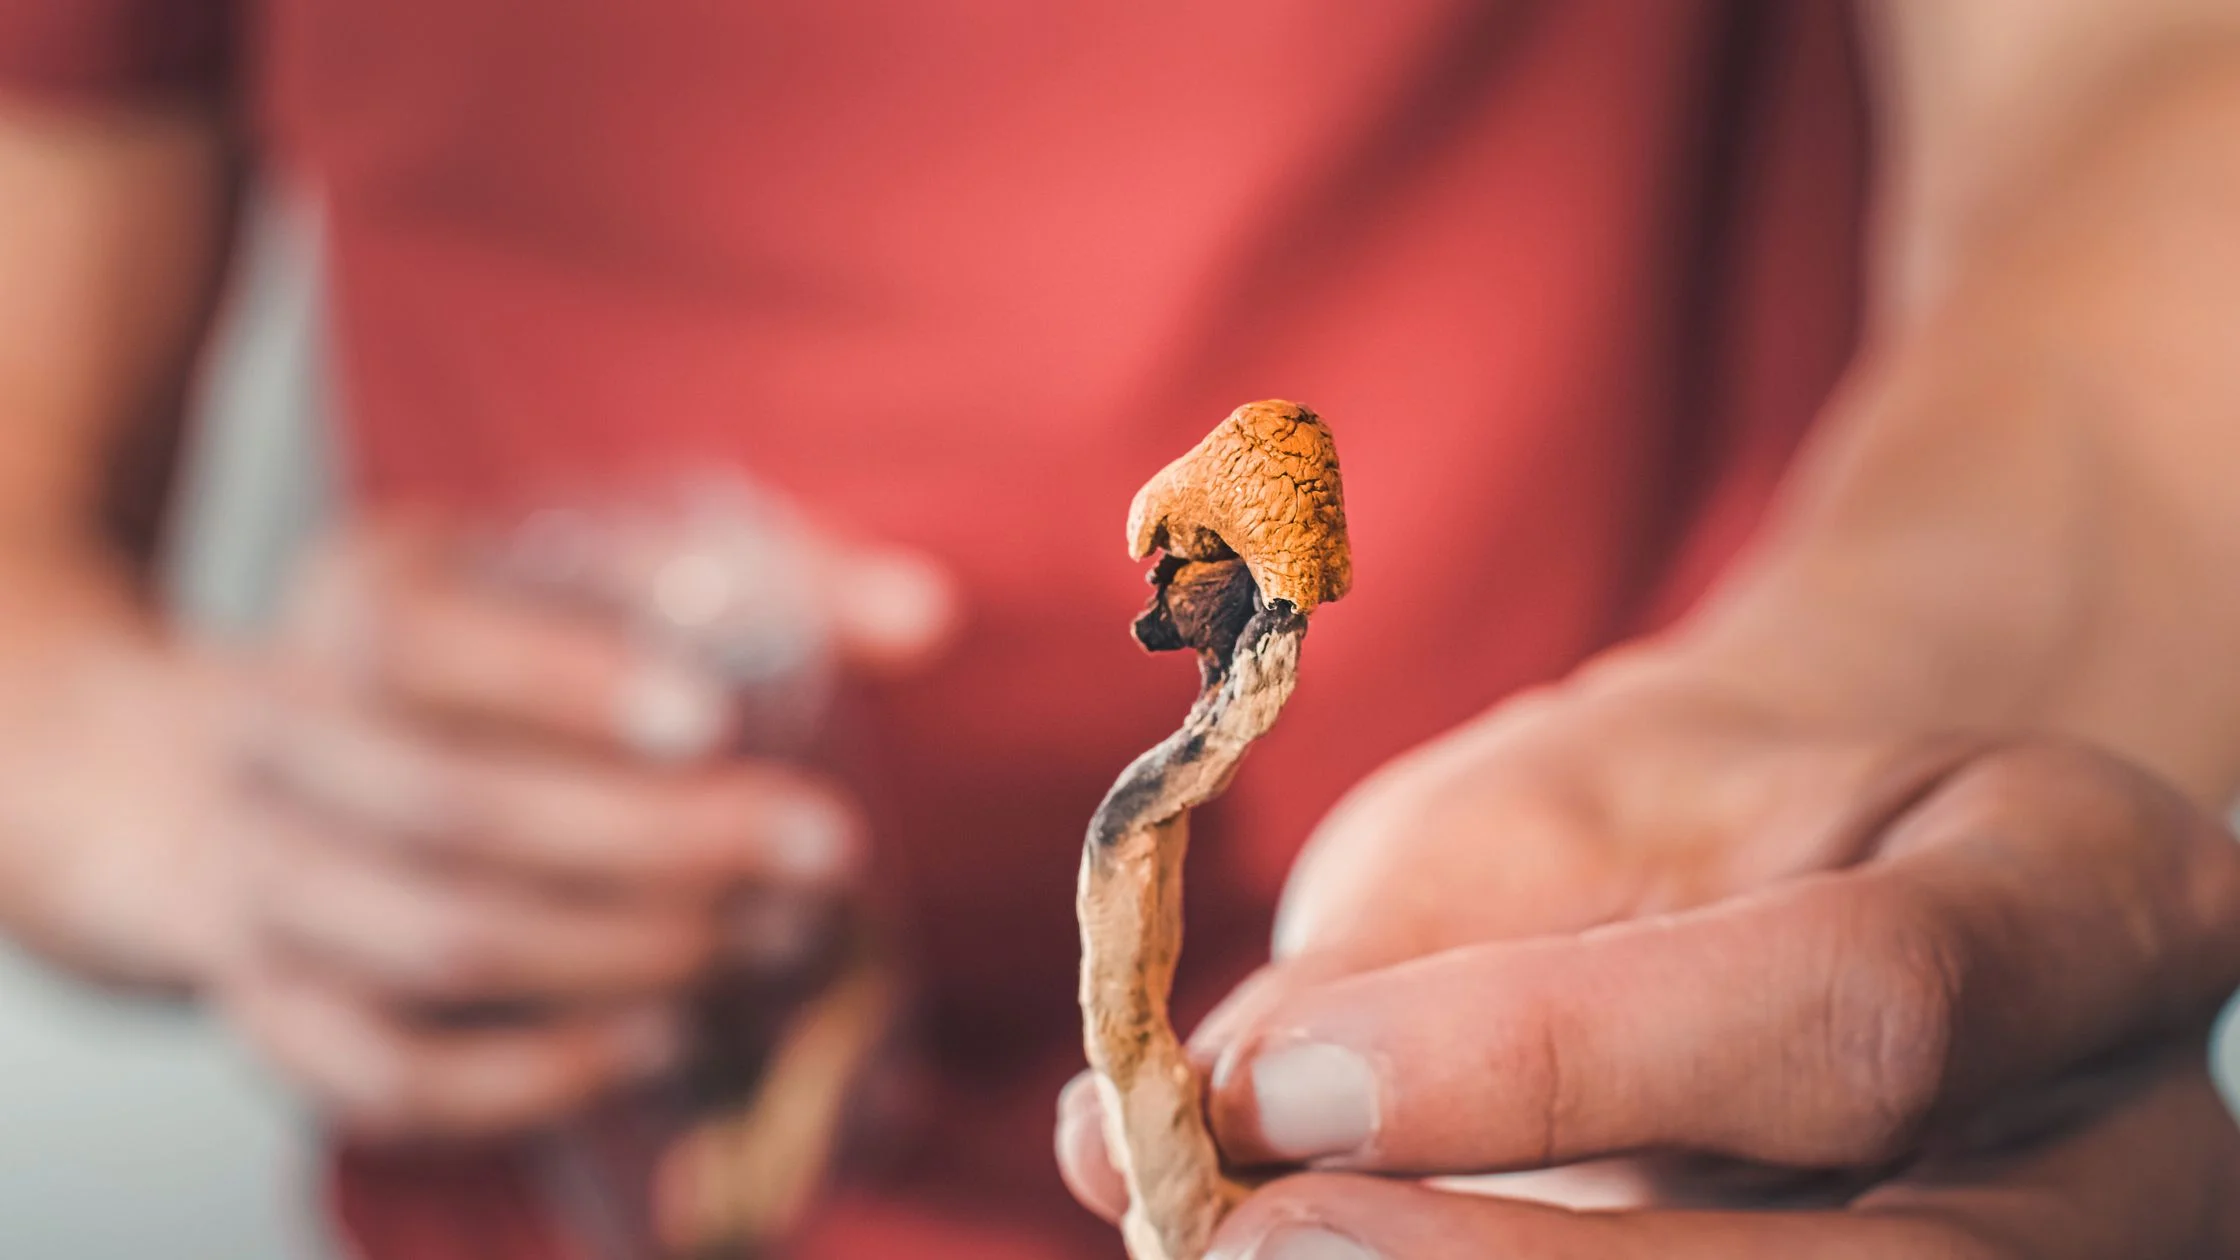 Microdosing Mushrooms: Common Questions Answered